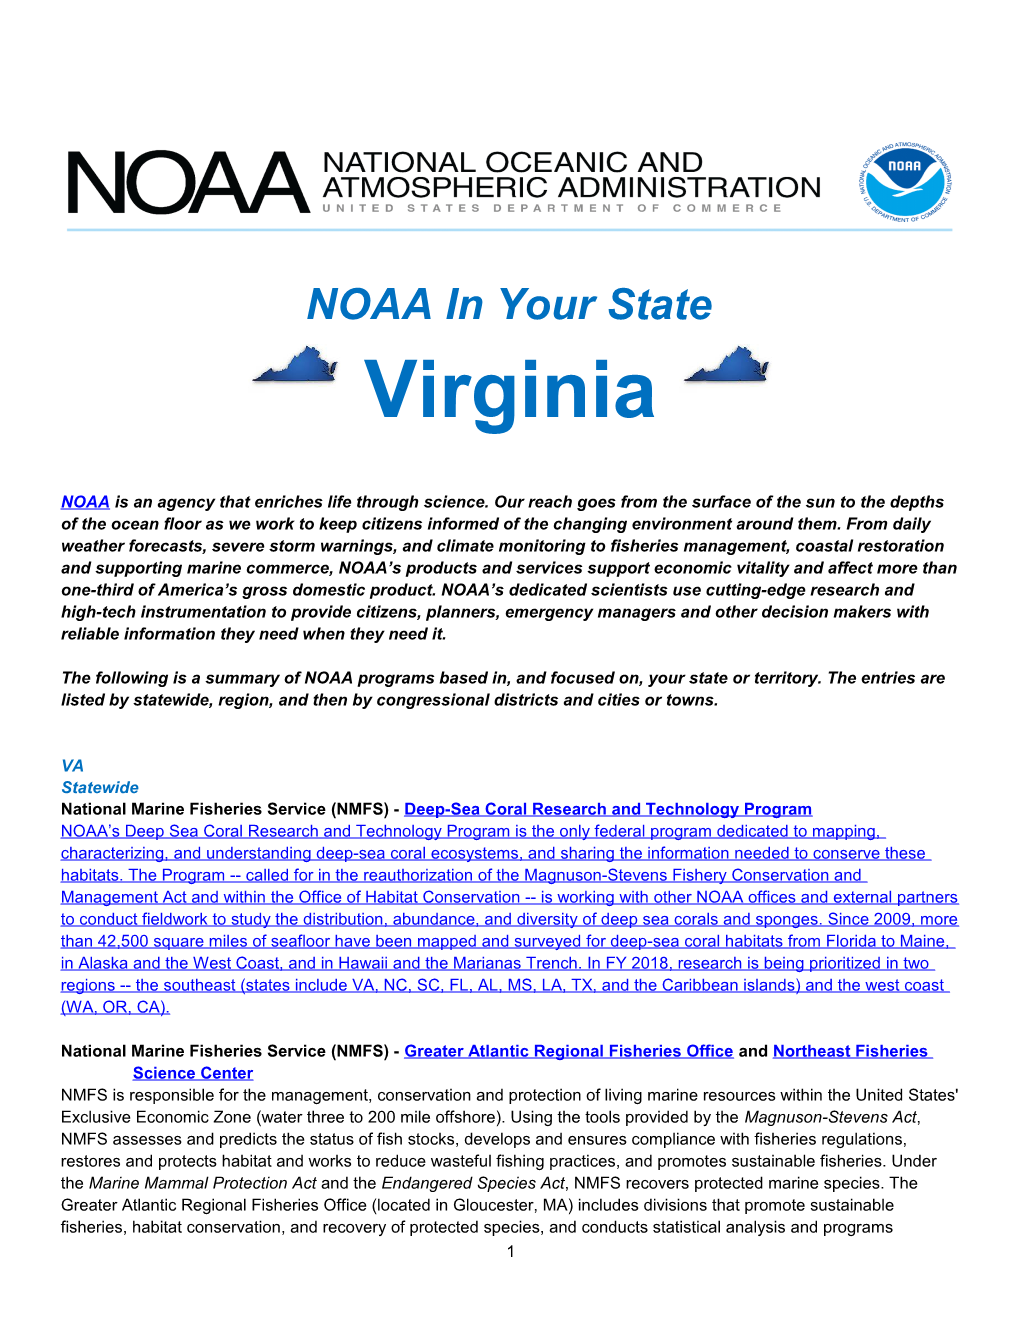 NOAA in Your State - Virginia